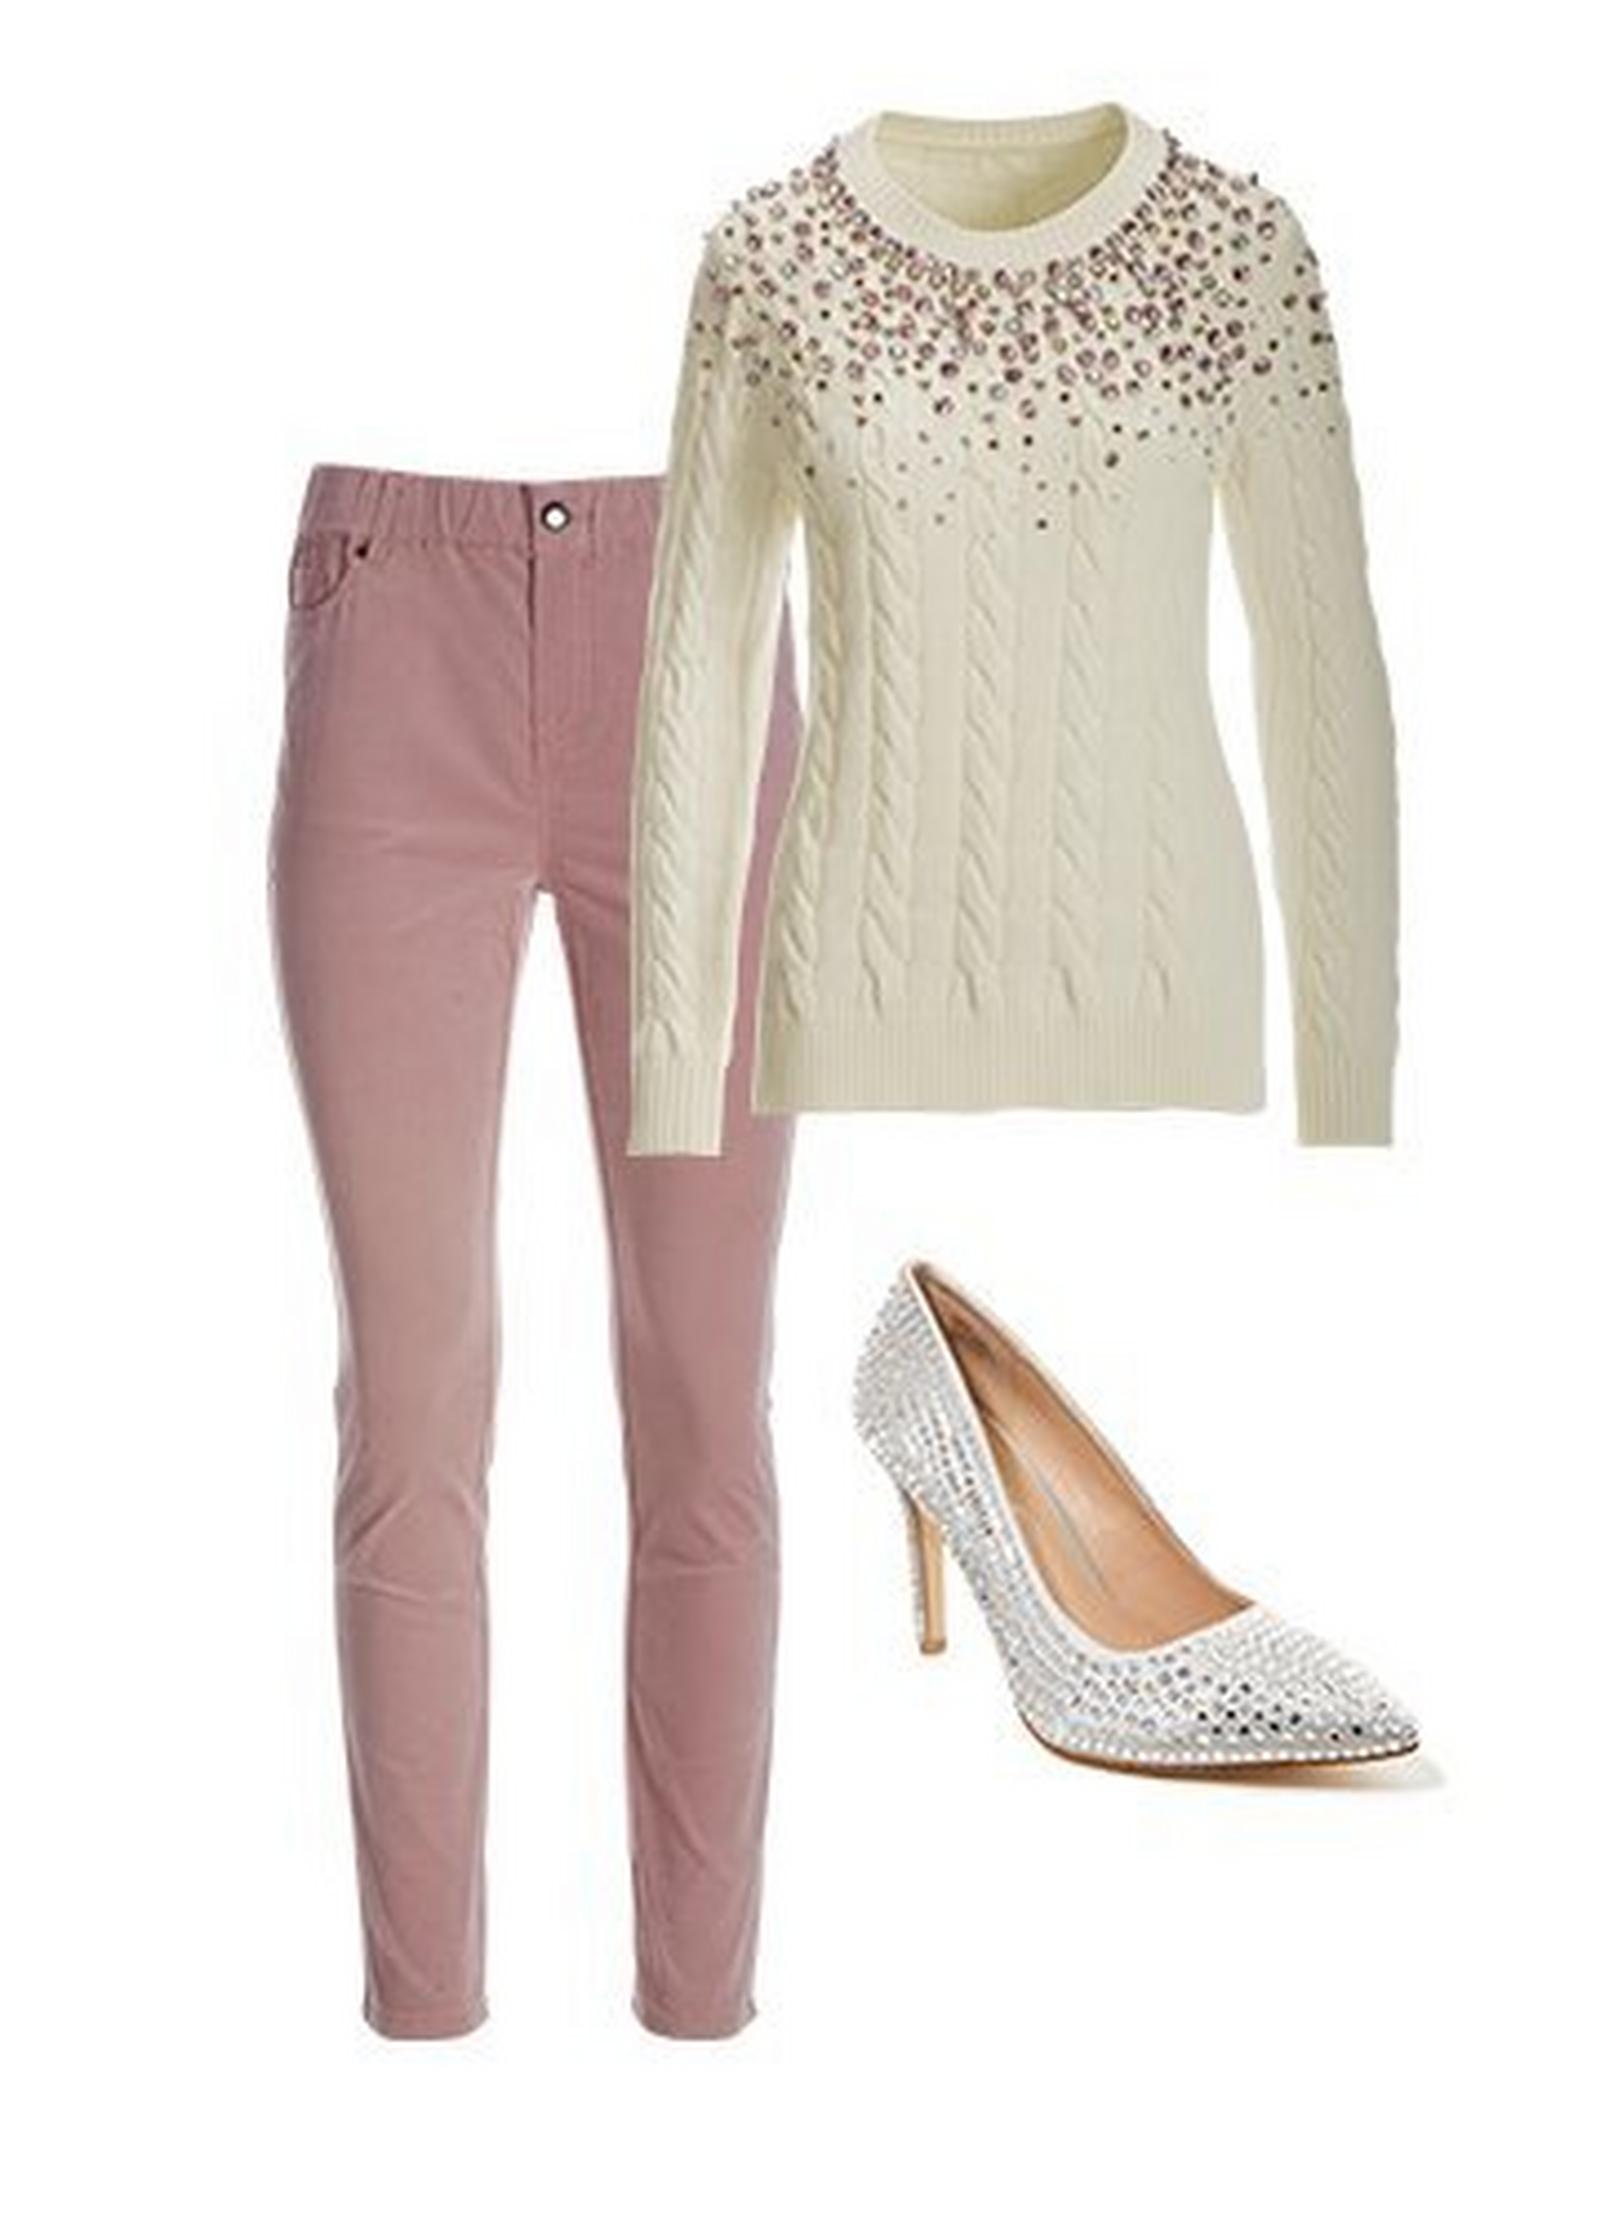 pink velvet pants, white cable knit embellished sweater, and silver rhinestone embellished pumps.